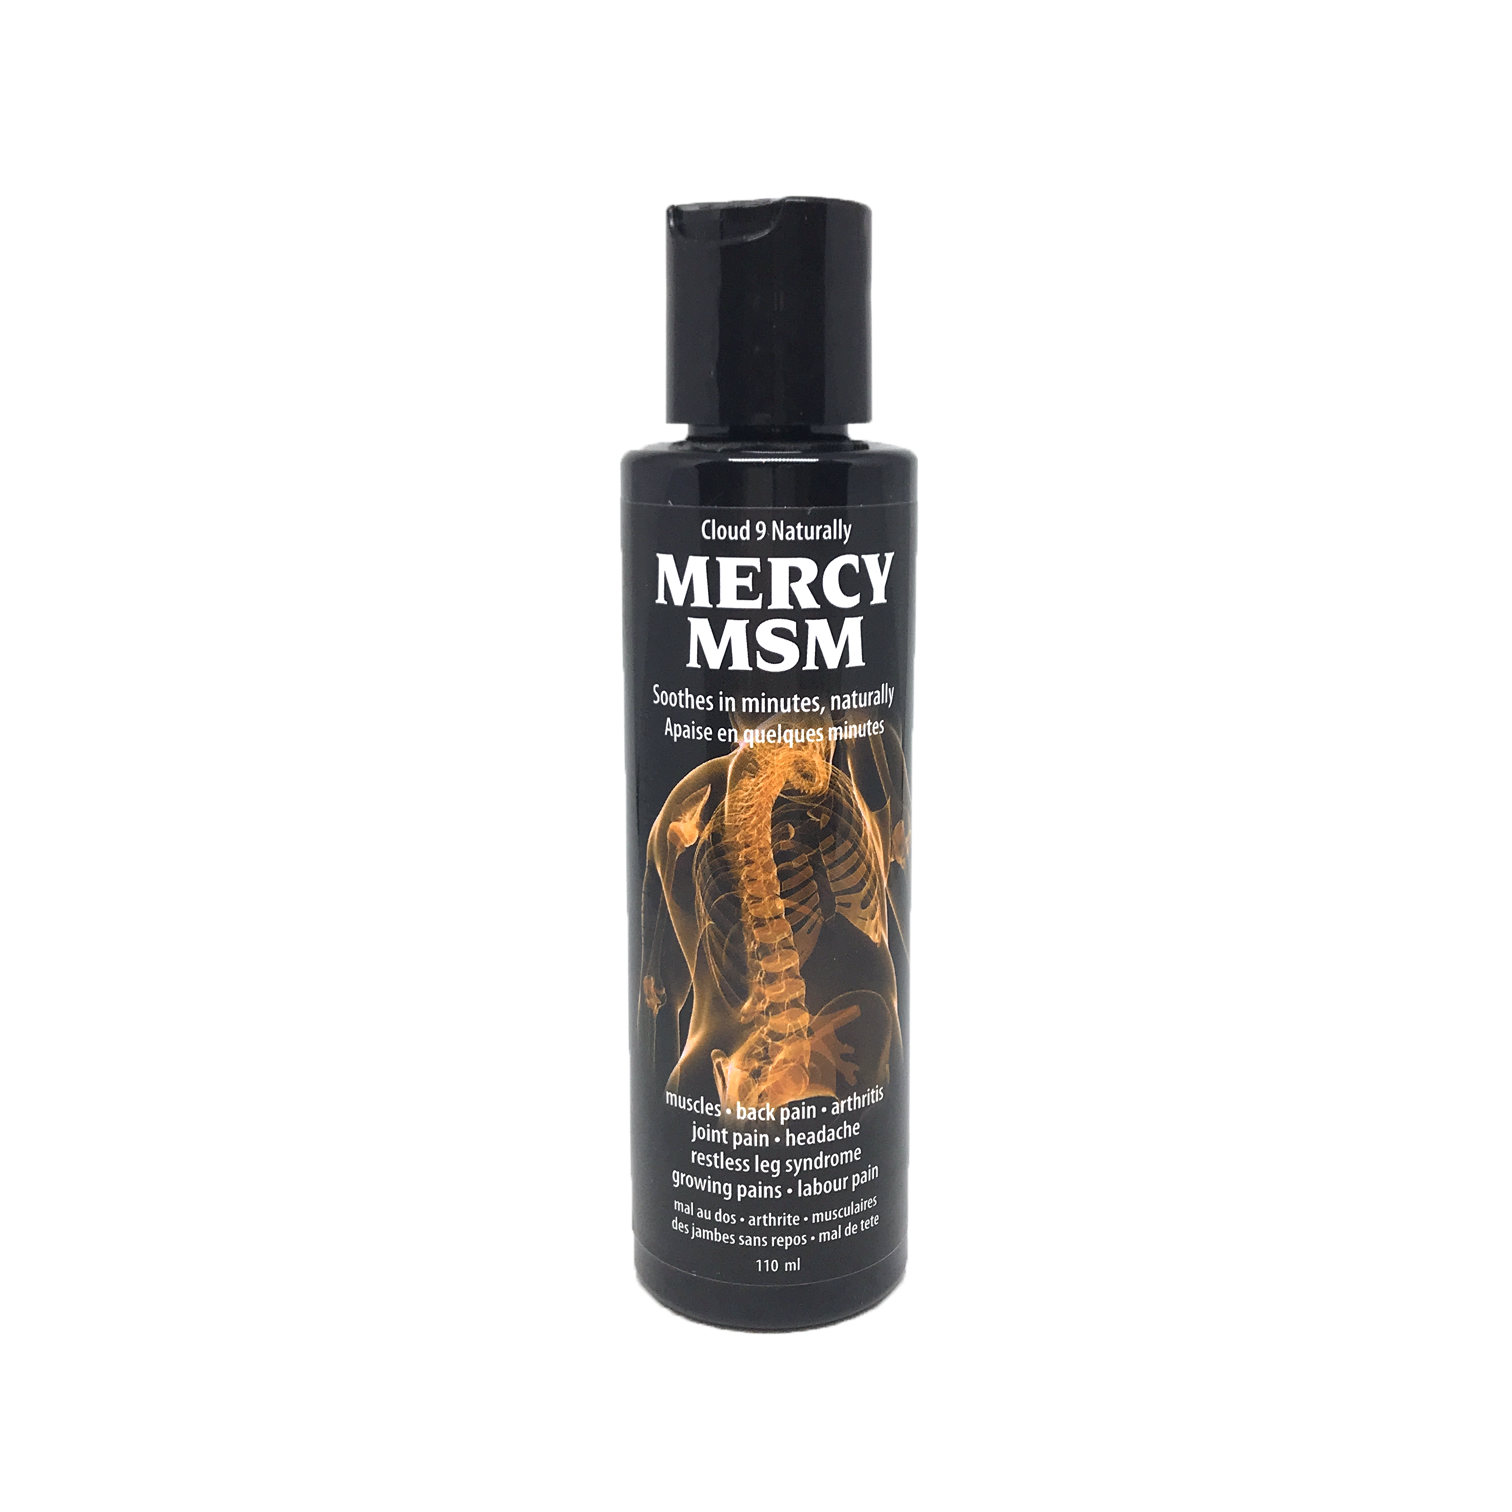 Cloud 9 Naturally Mercy MSM Lotion 110ml